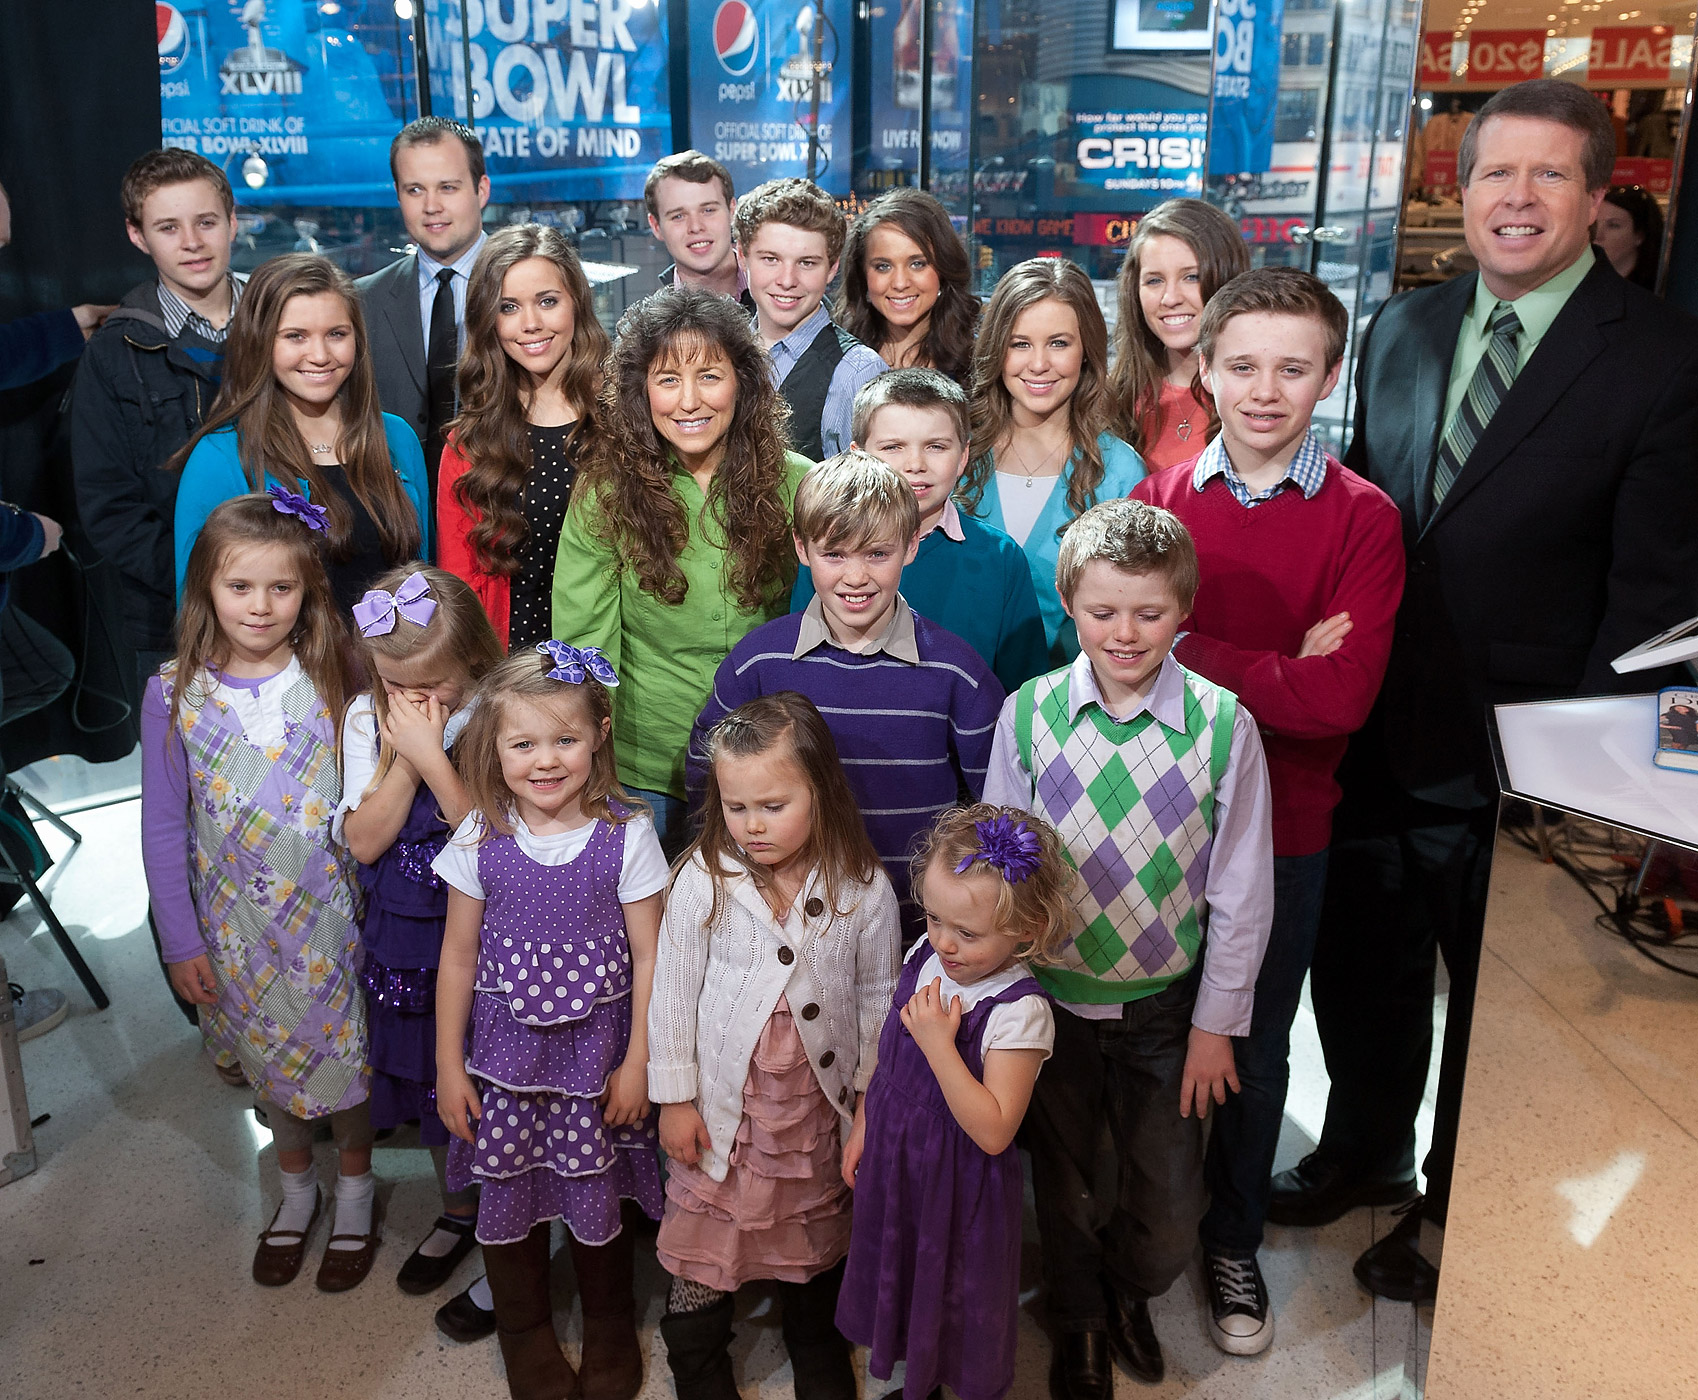 Robert Wagner And The Duggar Family Visit "Extra"